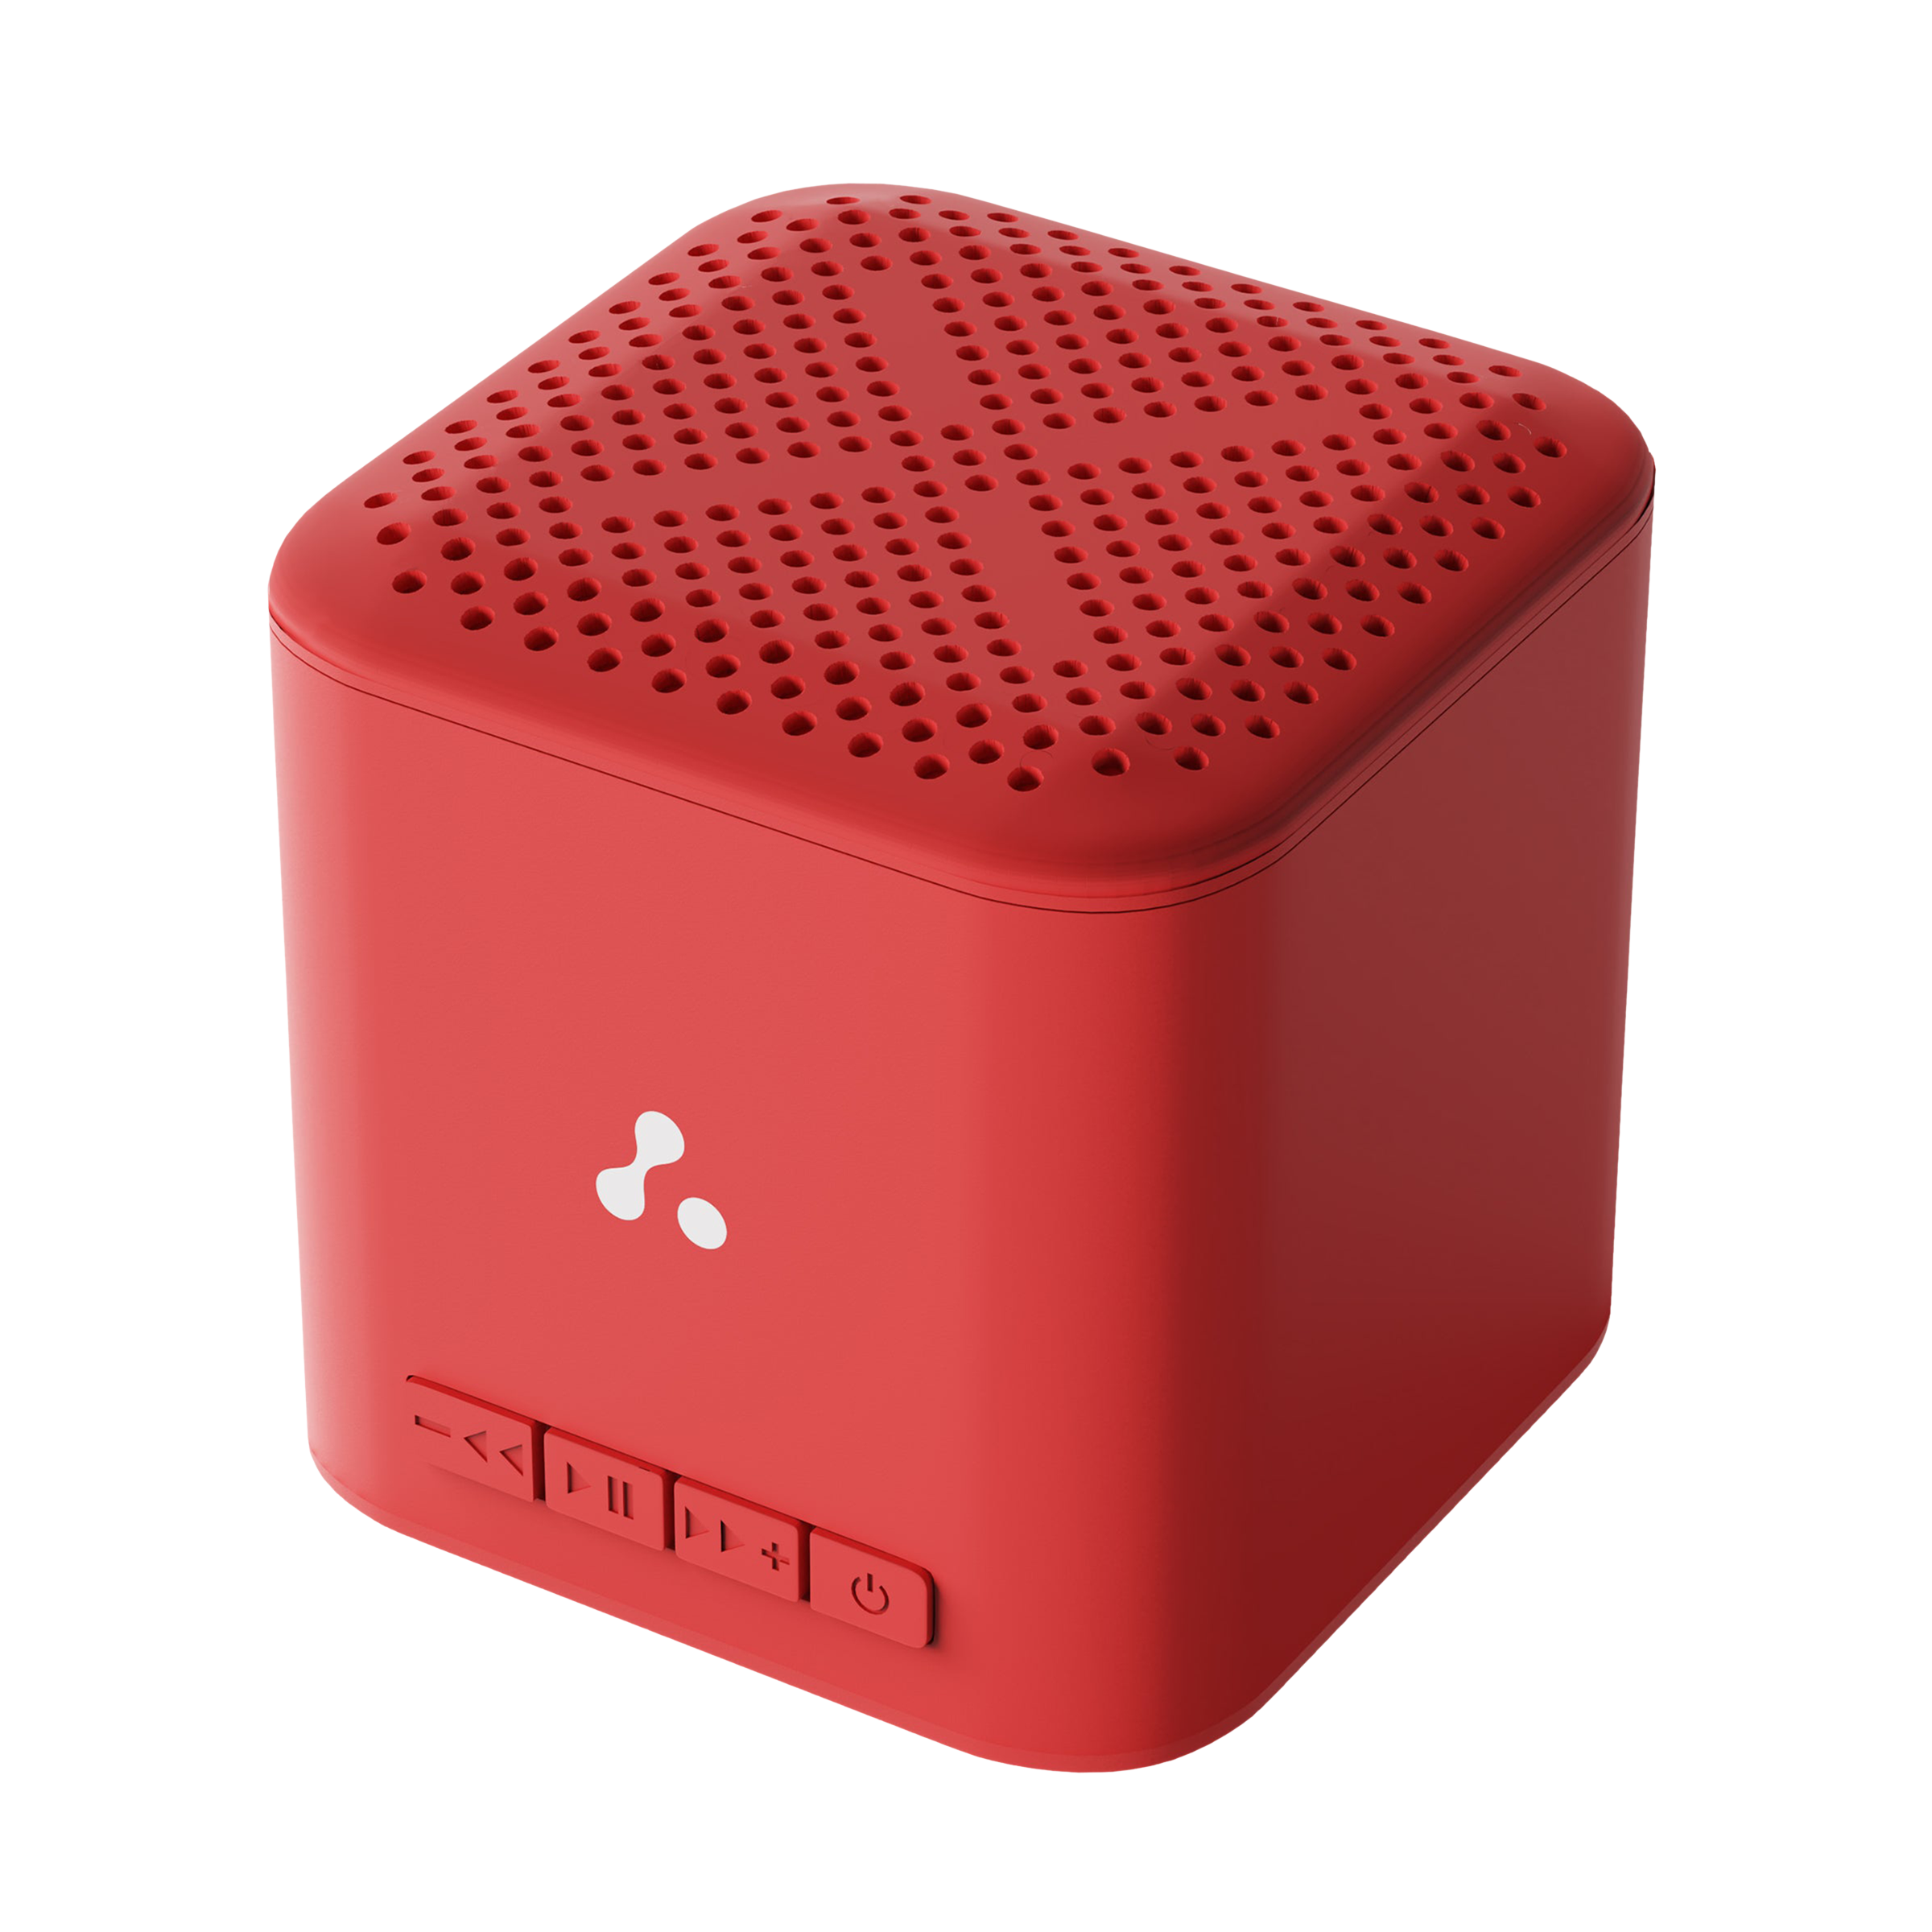 ambrane Evoke Cube Plus 5W Portable Bluetooth Speaker (12 Hours Playback Time, Red)